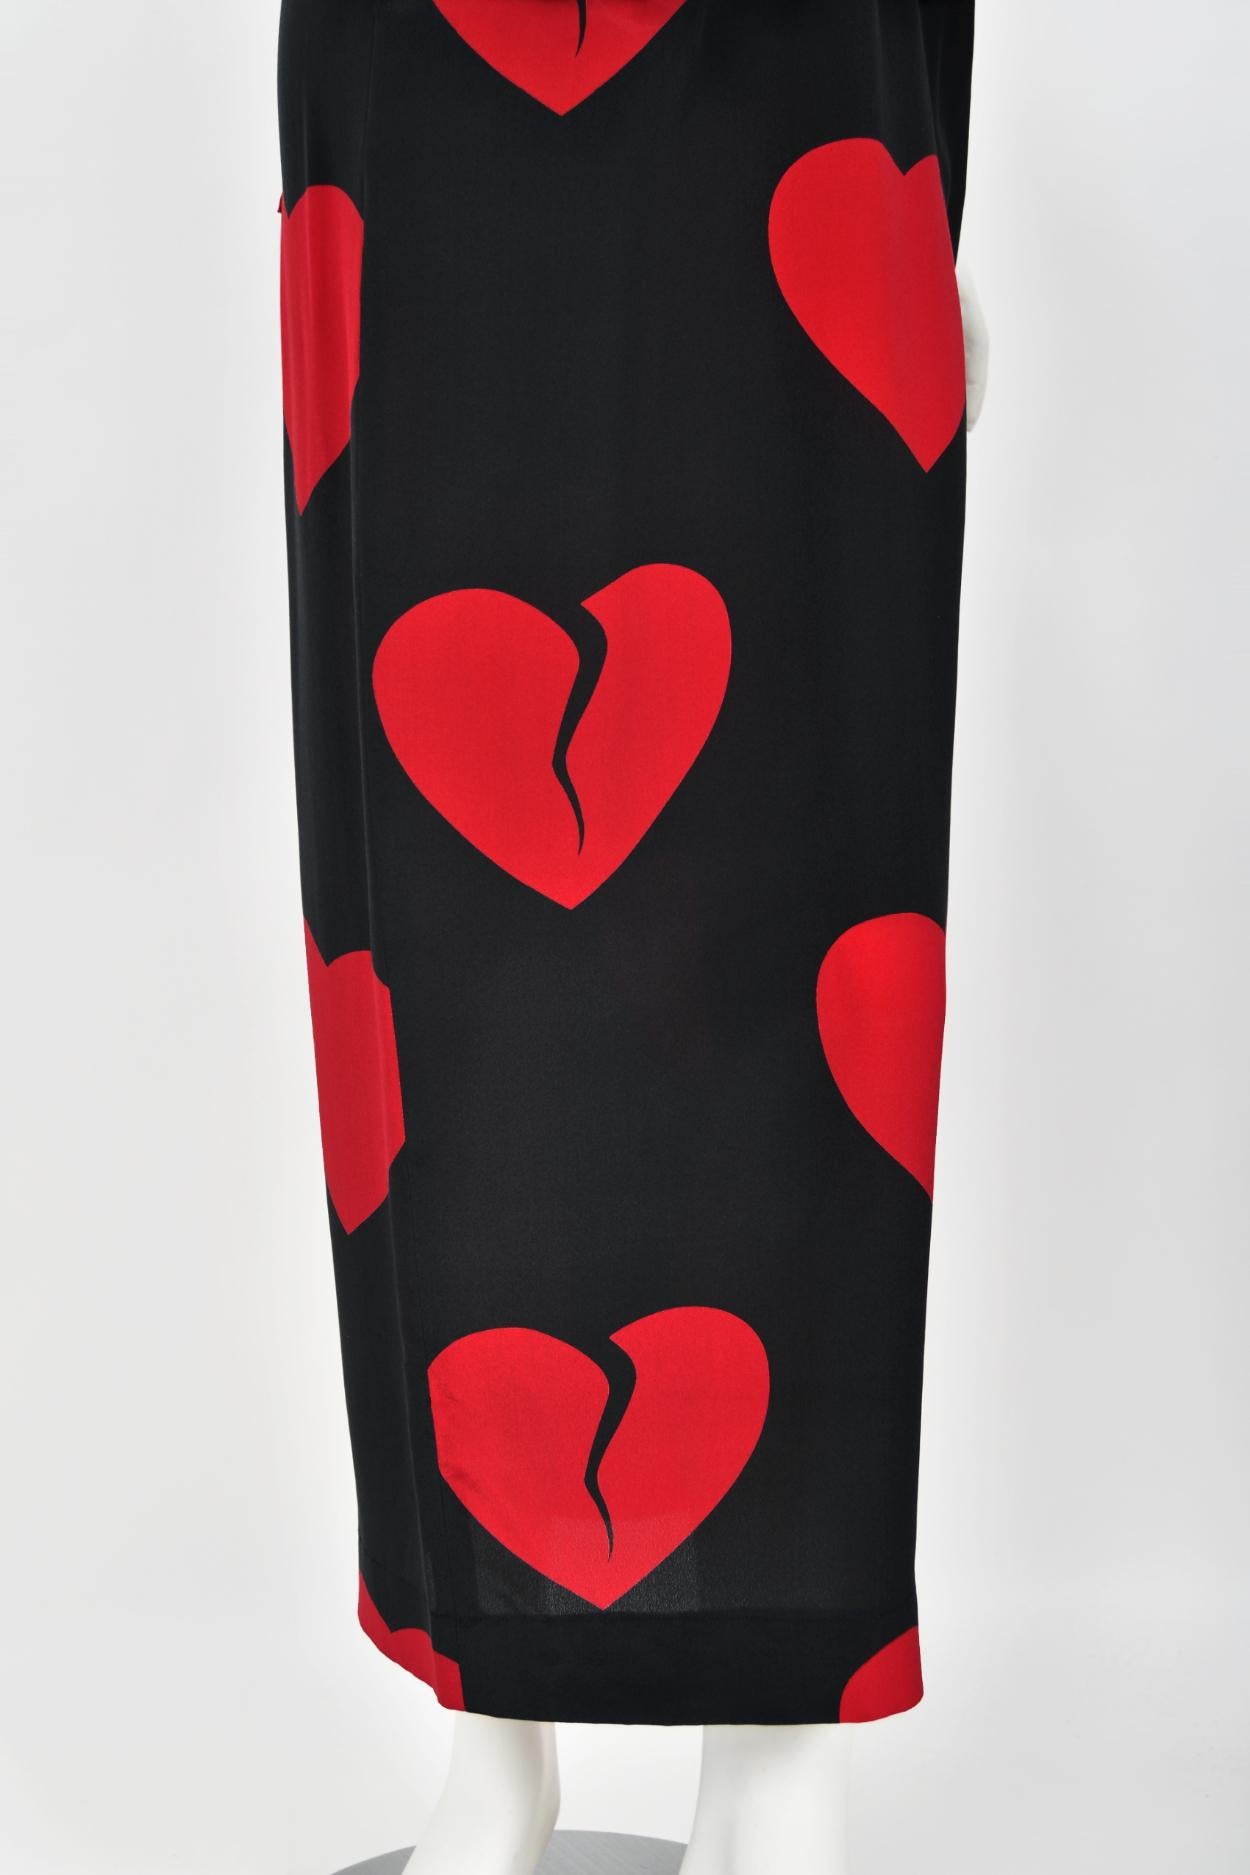 1994 Moschino Couture Documented 'Heartbreaker' Print Silk Convertible Dress  For Sale 5